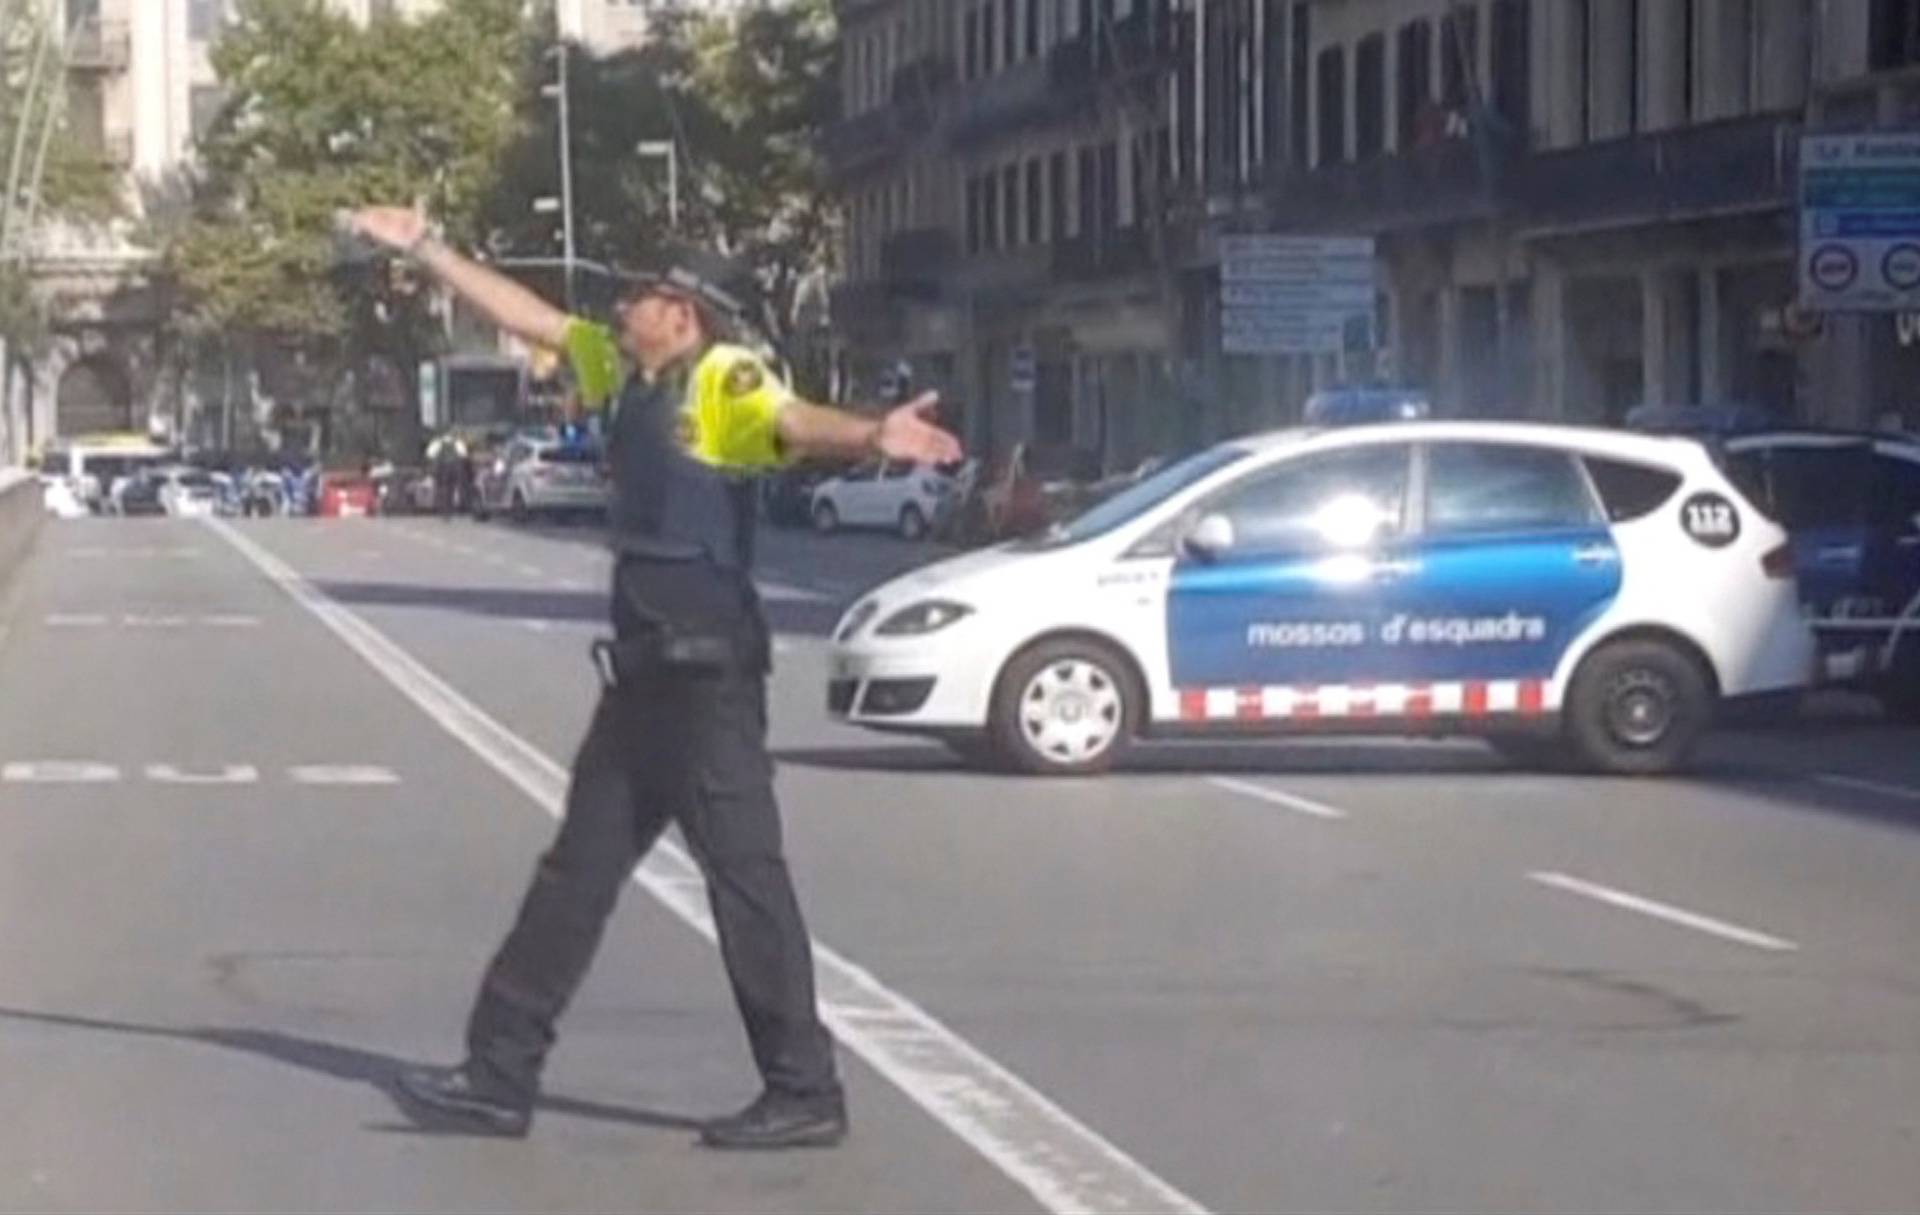 A still image from video shows a police officer gesturing while walking across a road, after a van crashed into people in the centre of Barcelona